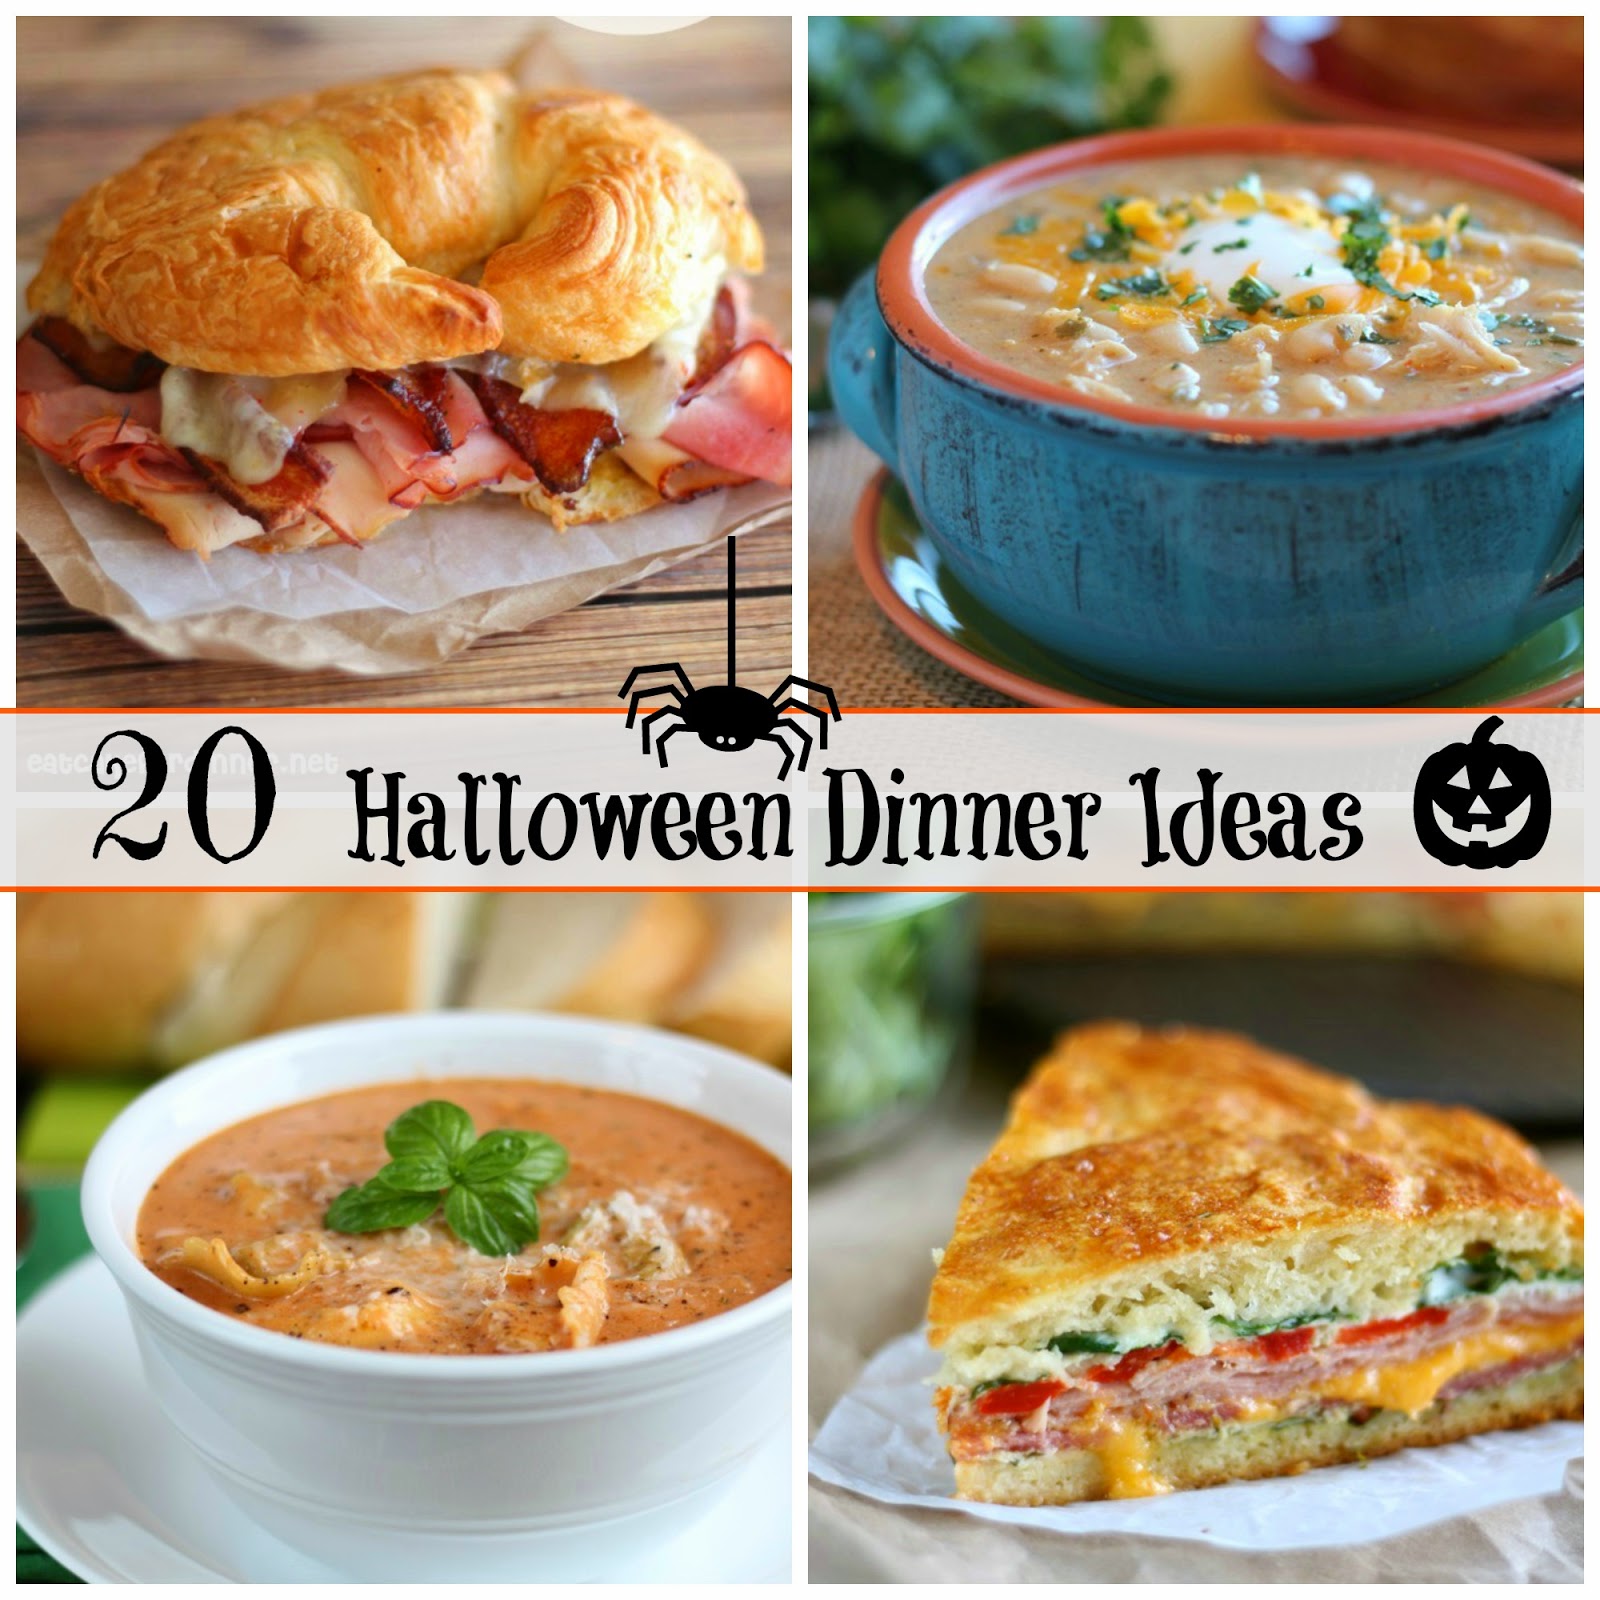 Eat Cake For Dinner: 20 Halloween Dinner Ideas to Warm you Up